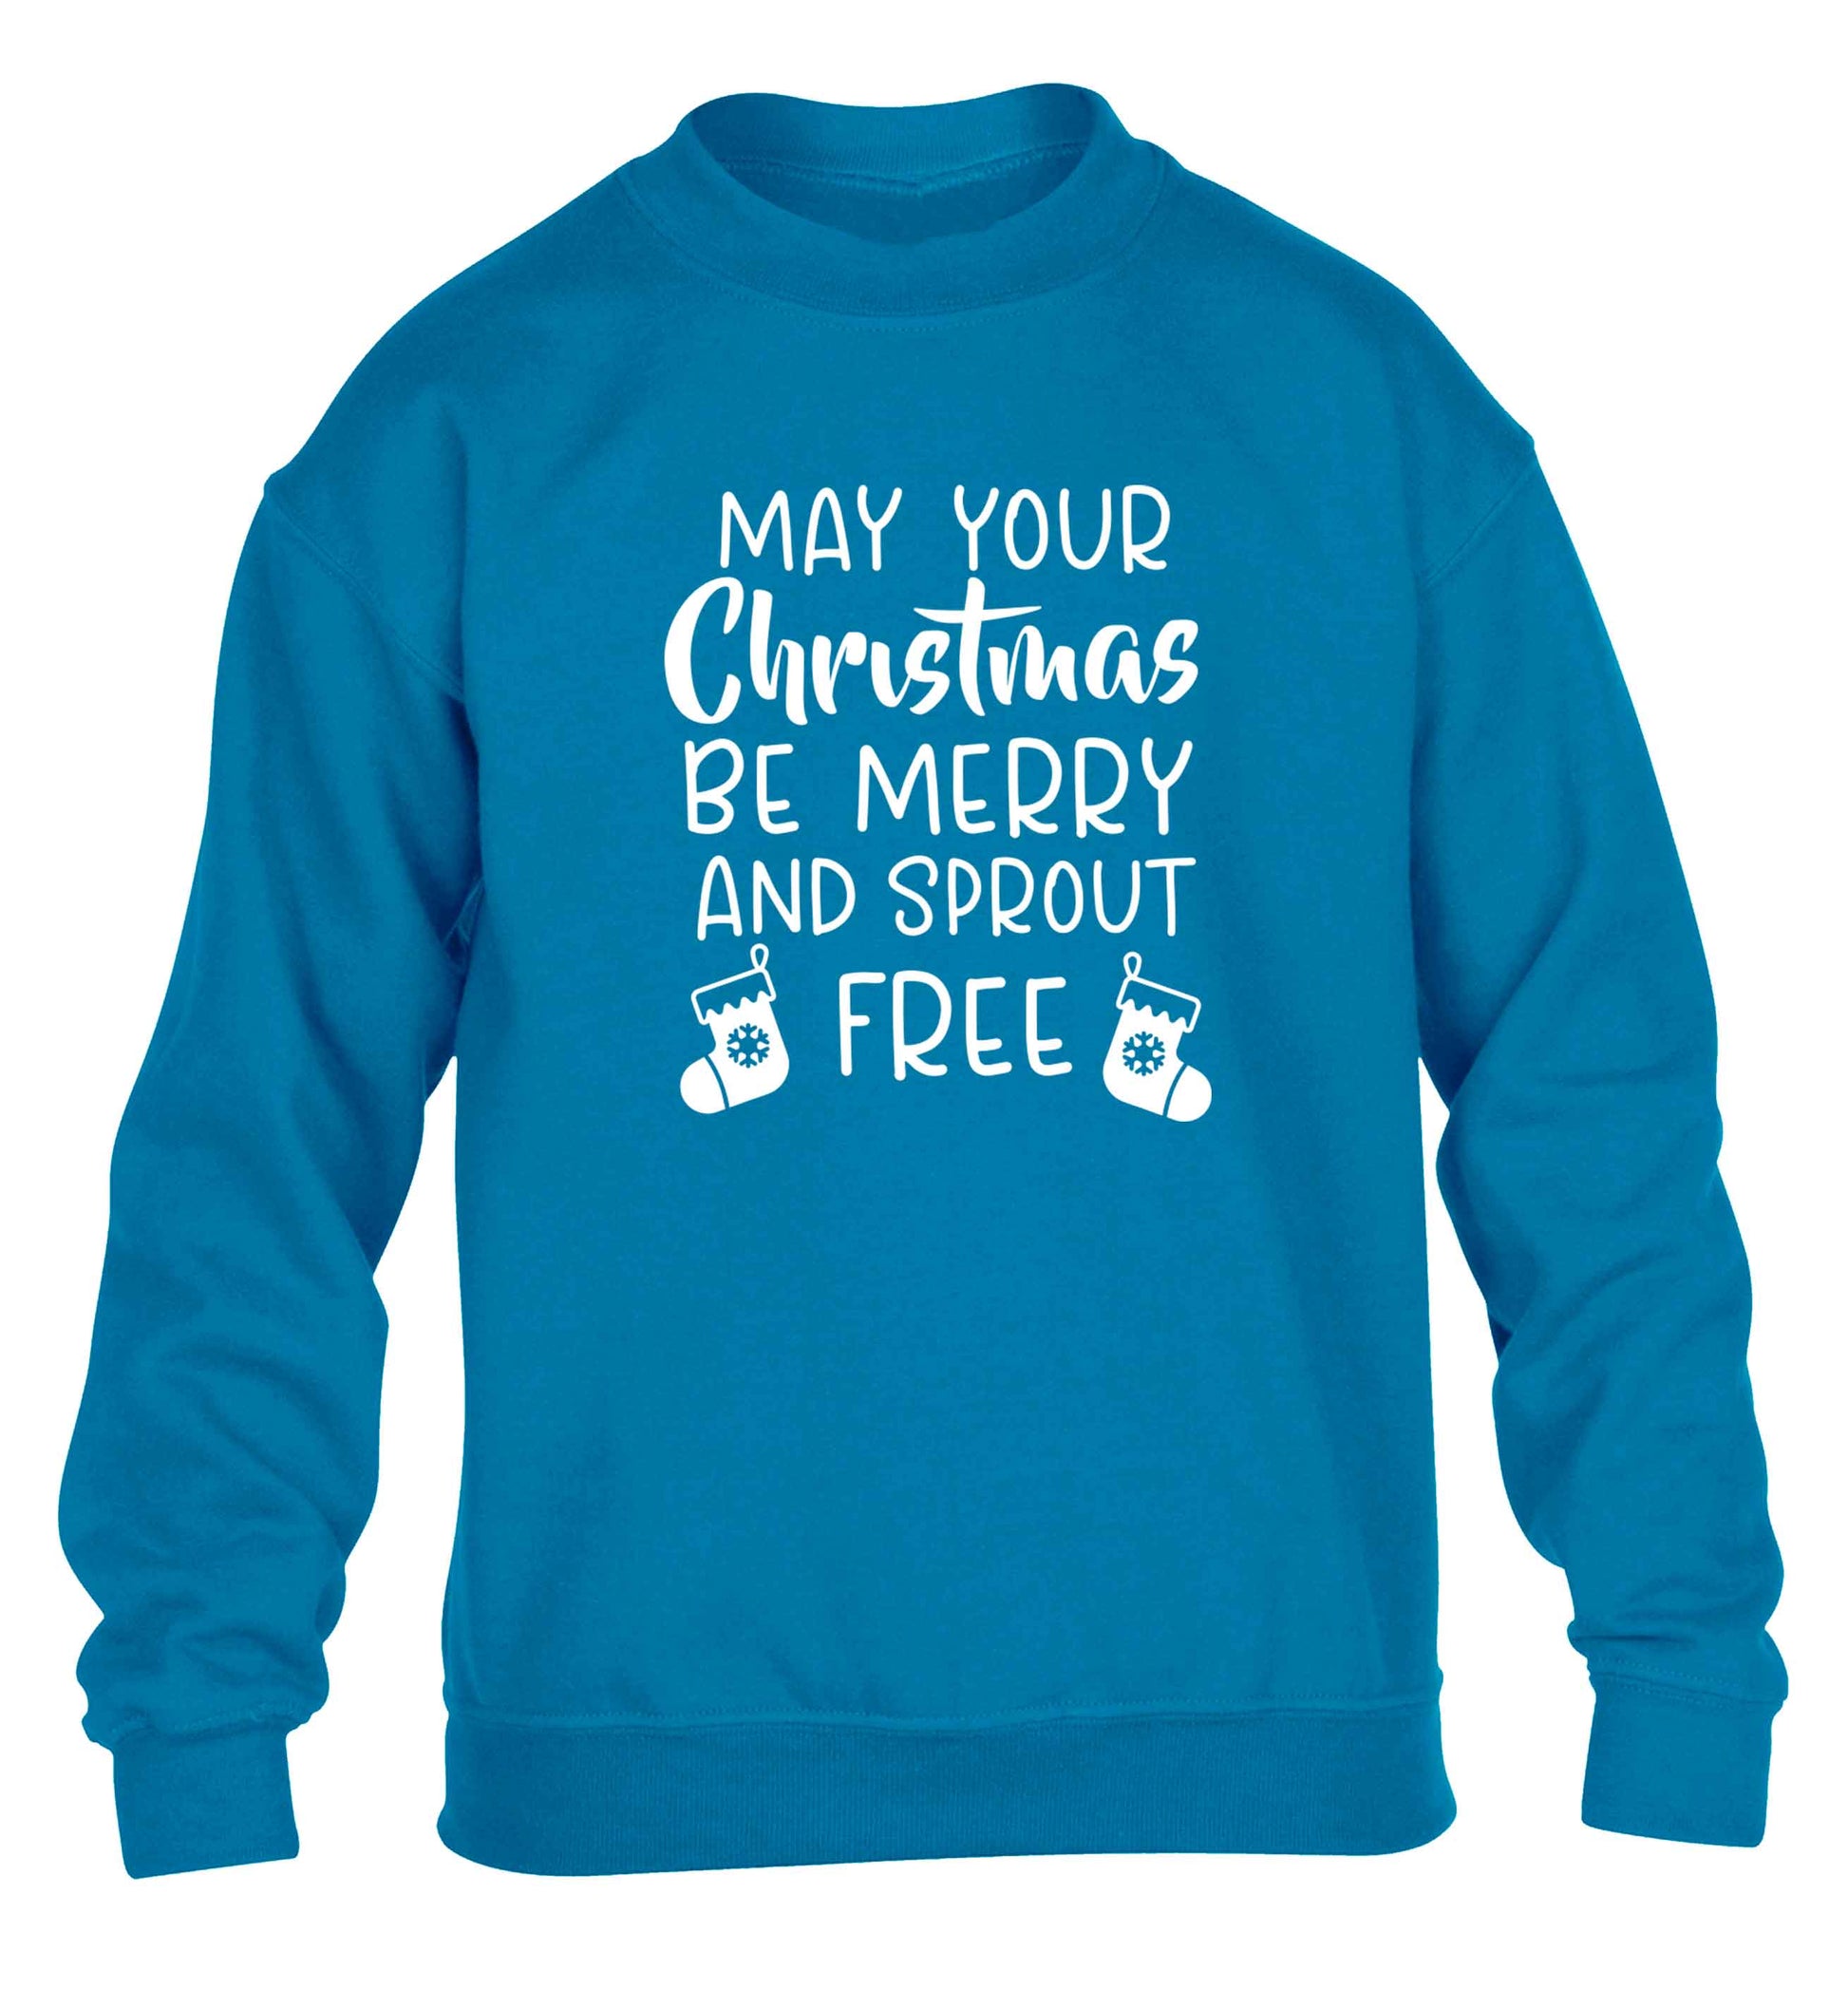 May your Christmas be merry and sprout free children's blue sweater 12-13 Years